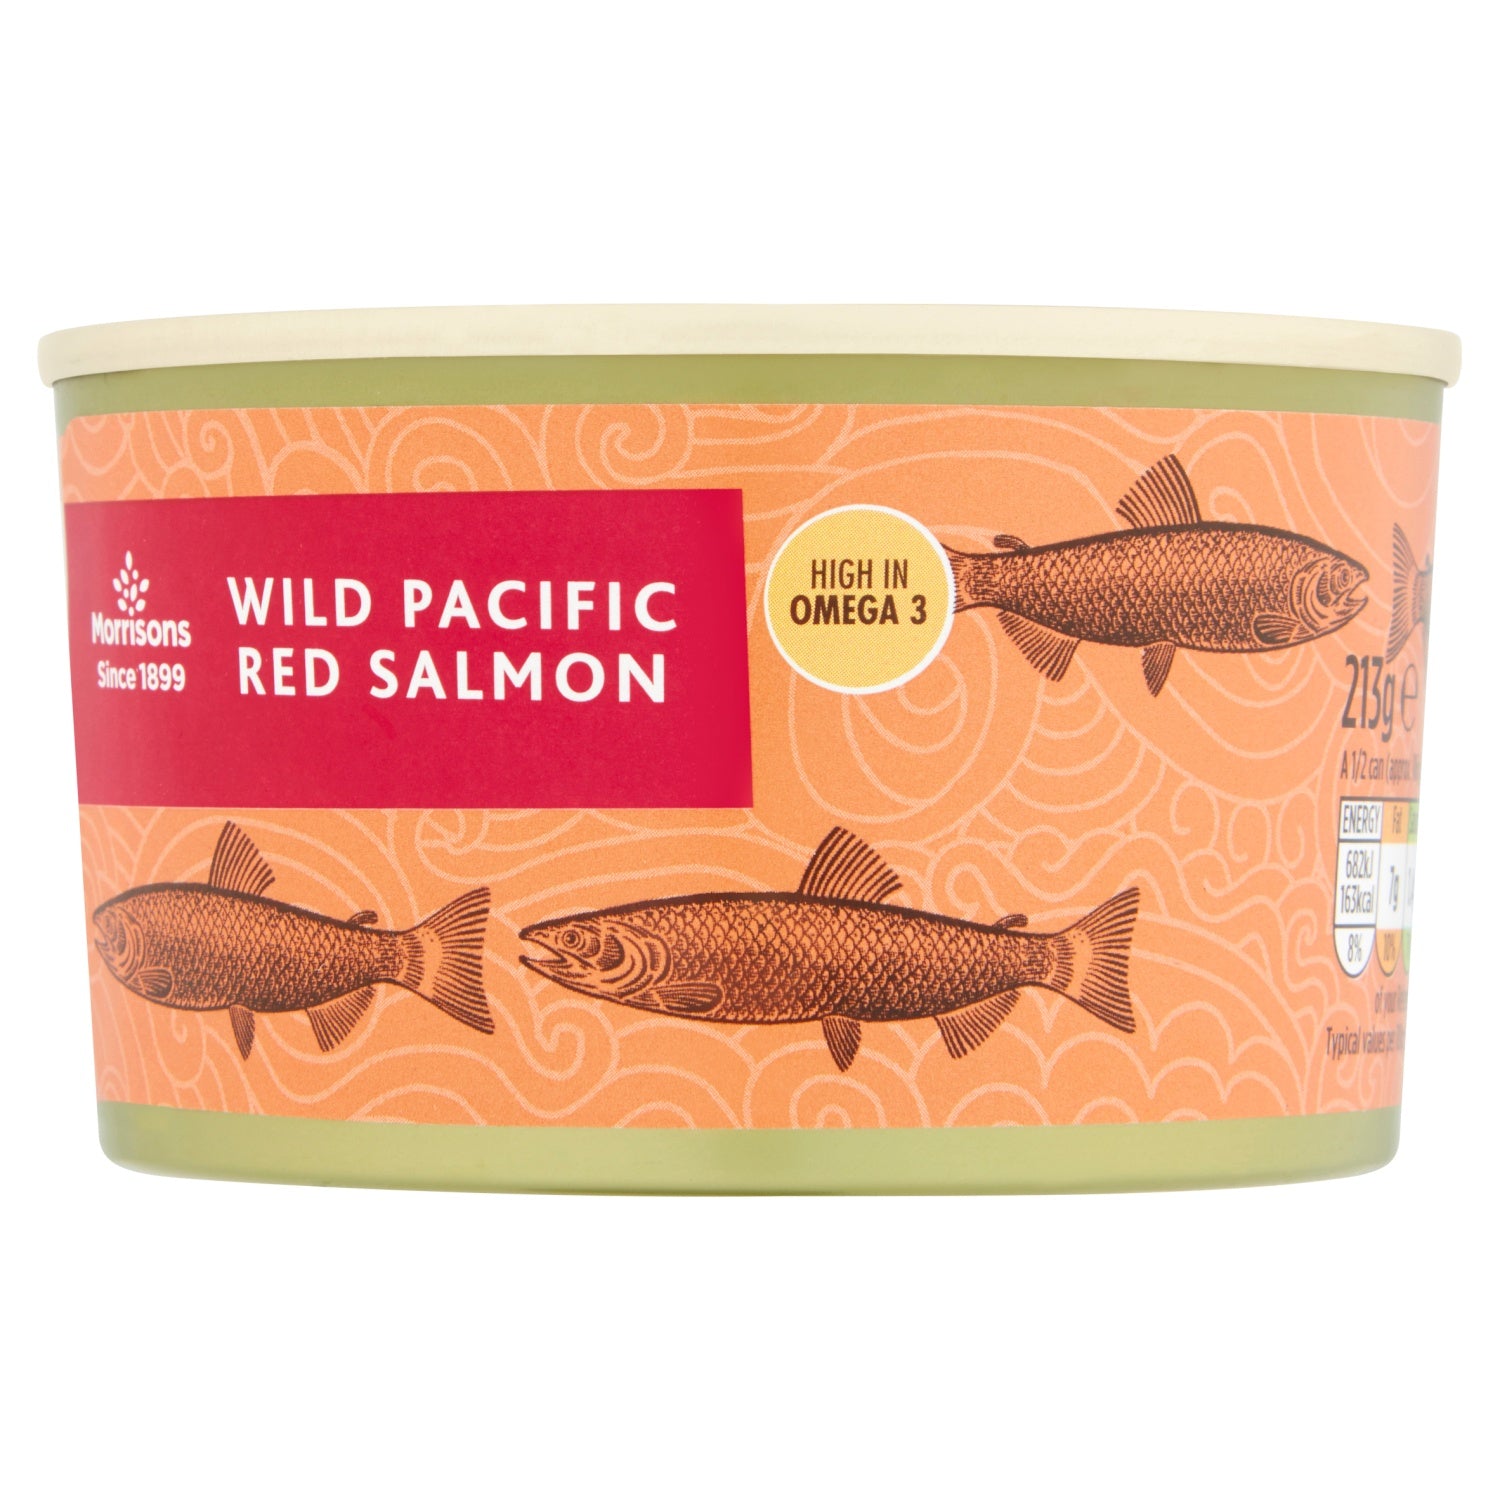 Morrisons Wild Pacific Red Salmon 213g